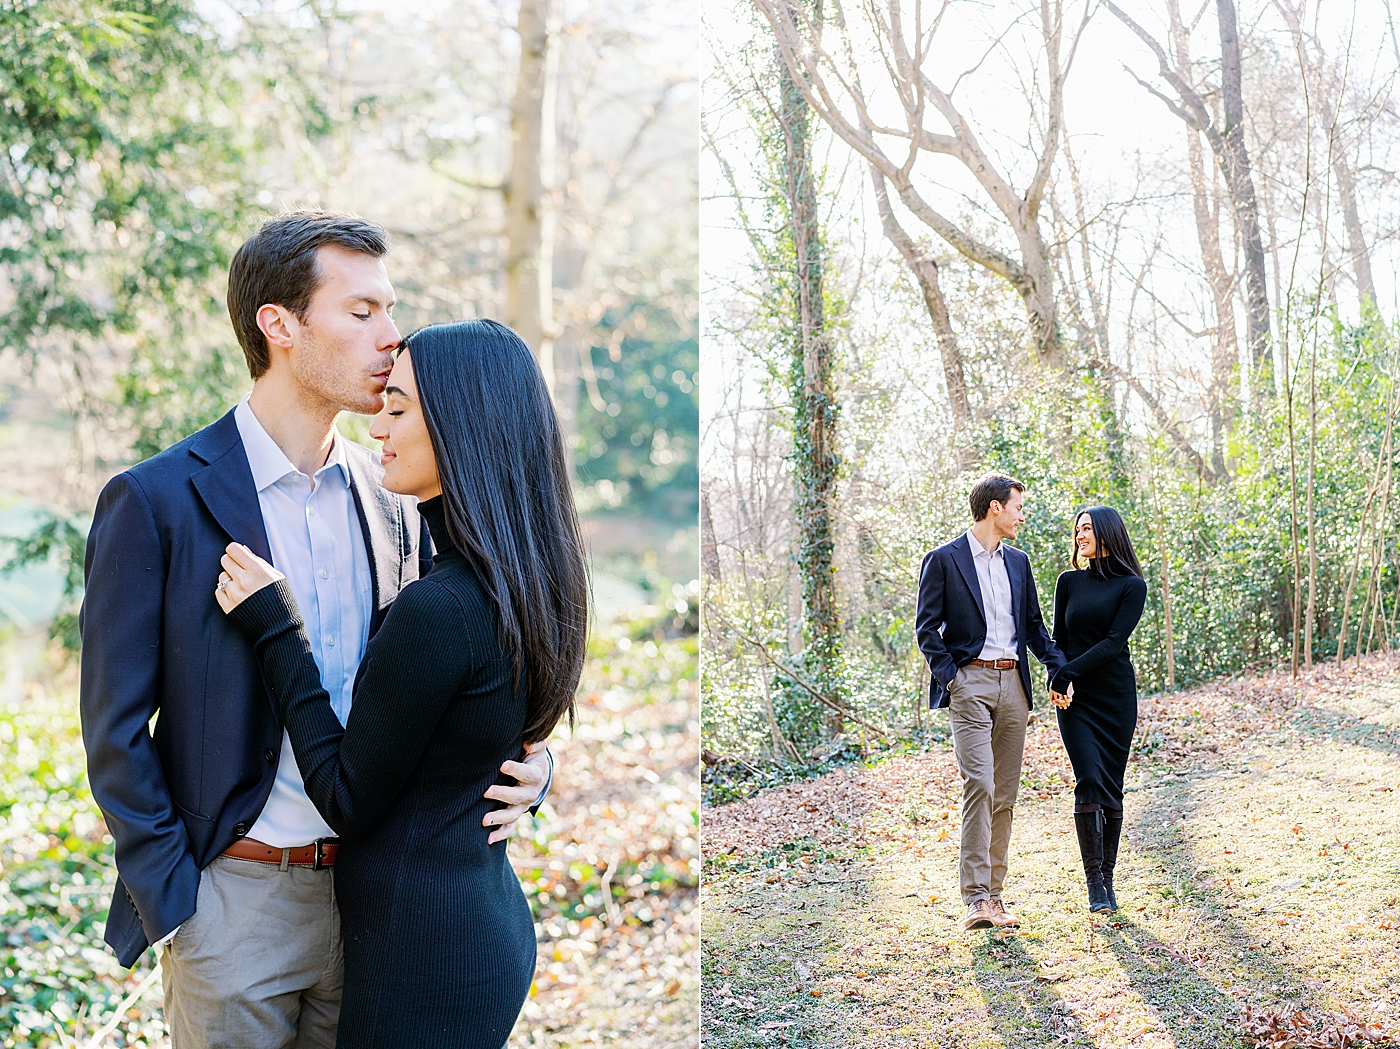 Couple in navy and black embracing during their engagement session | Image by Annie Laura Photo